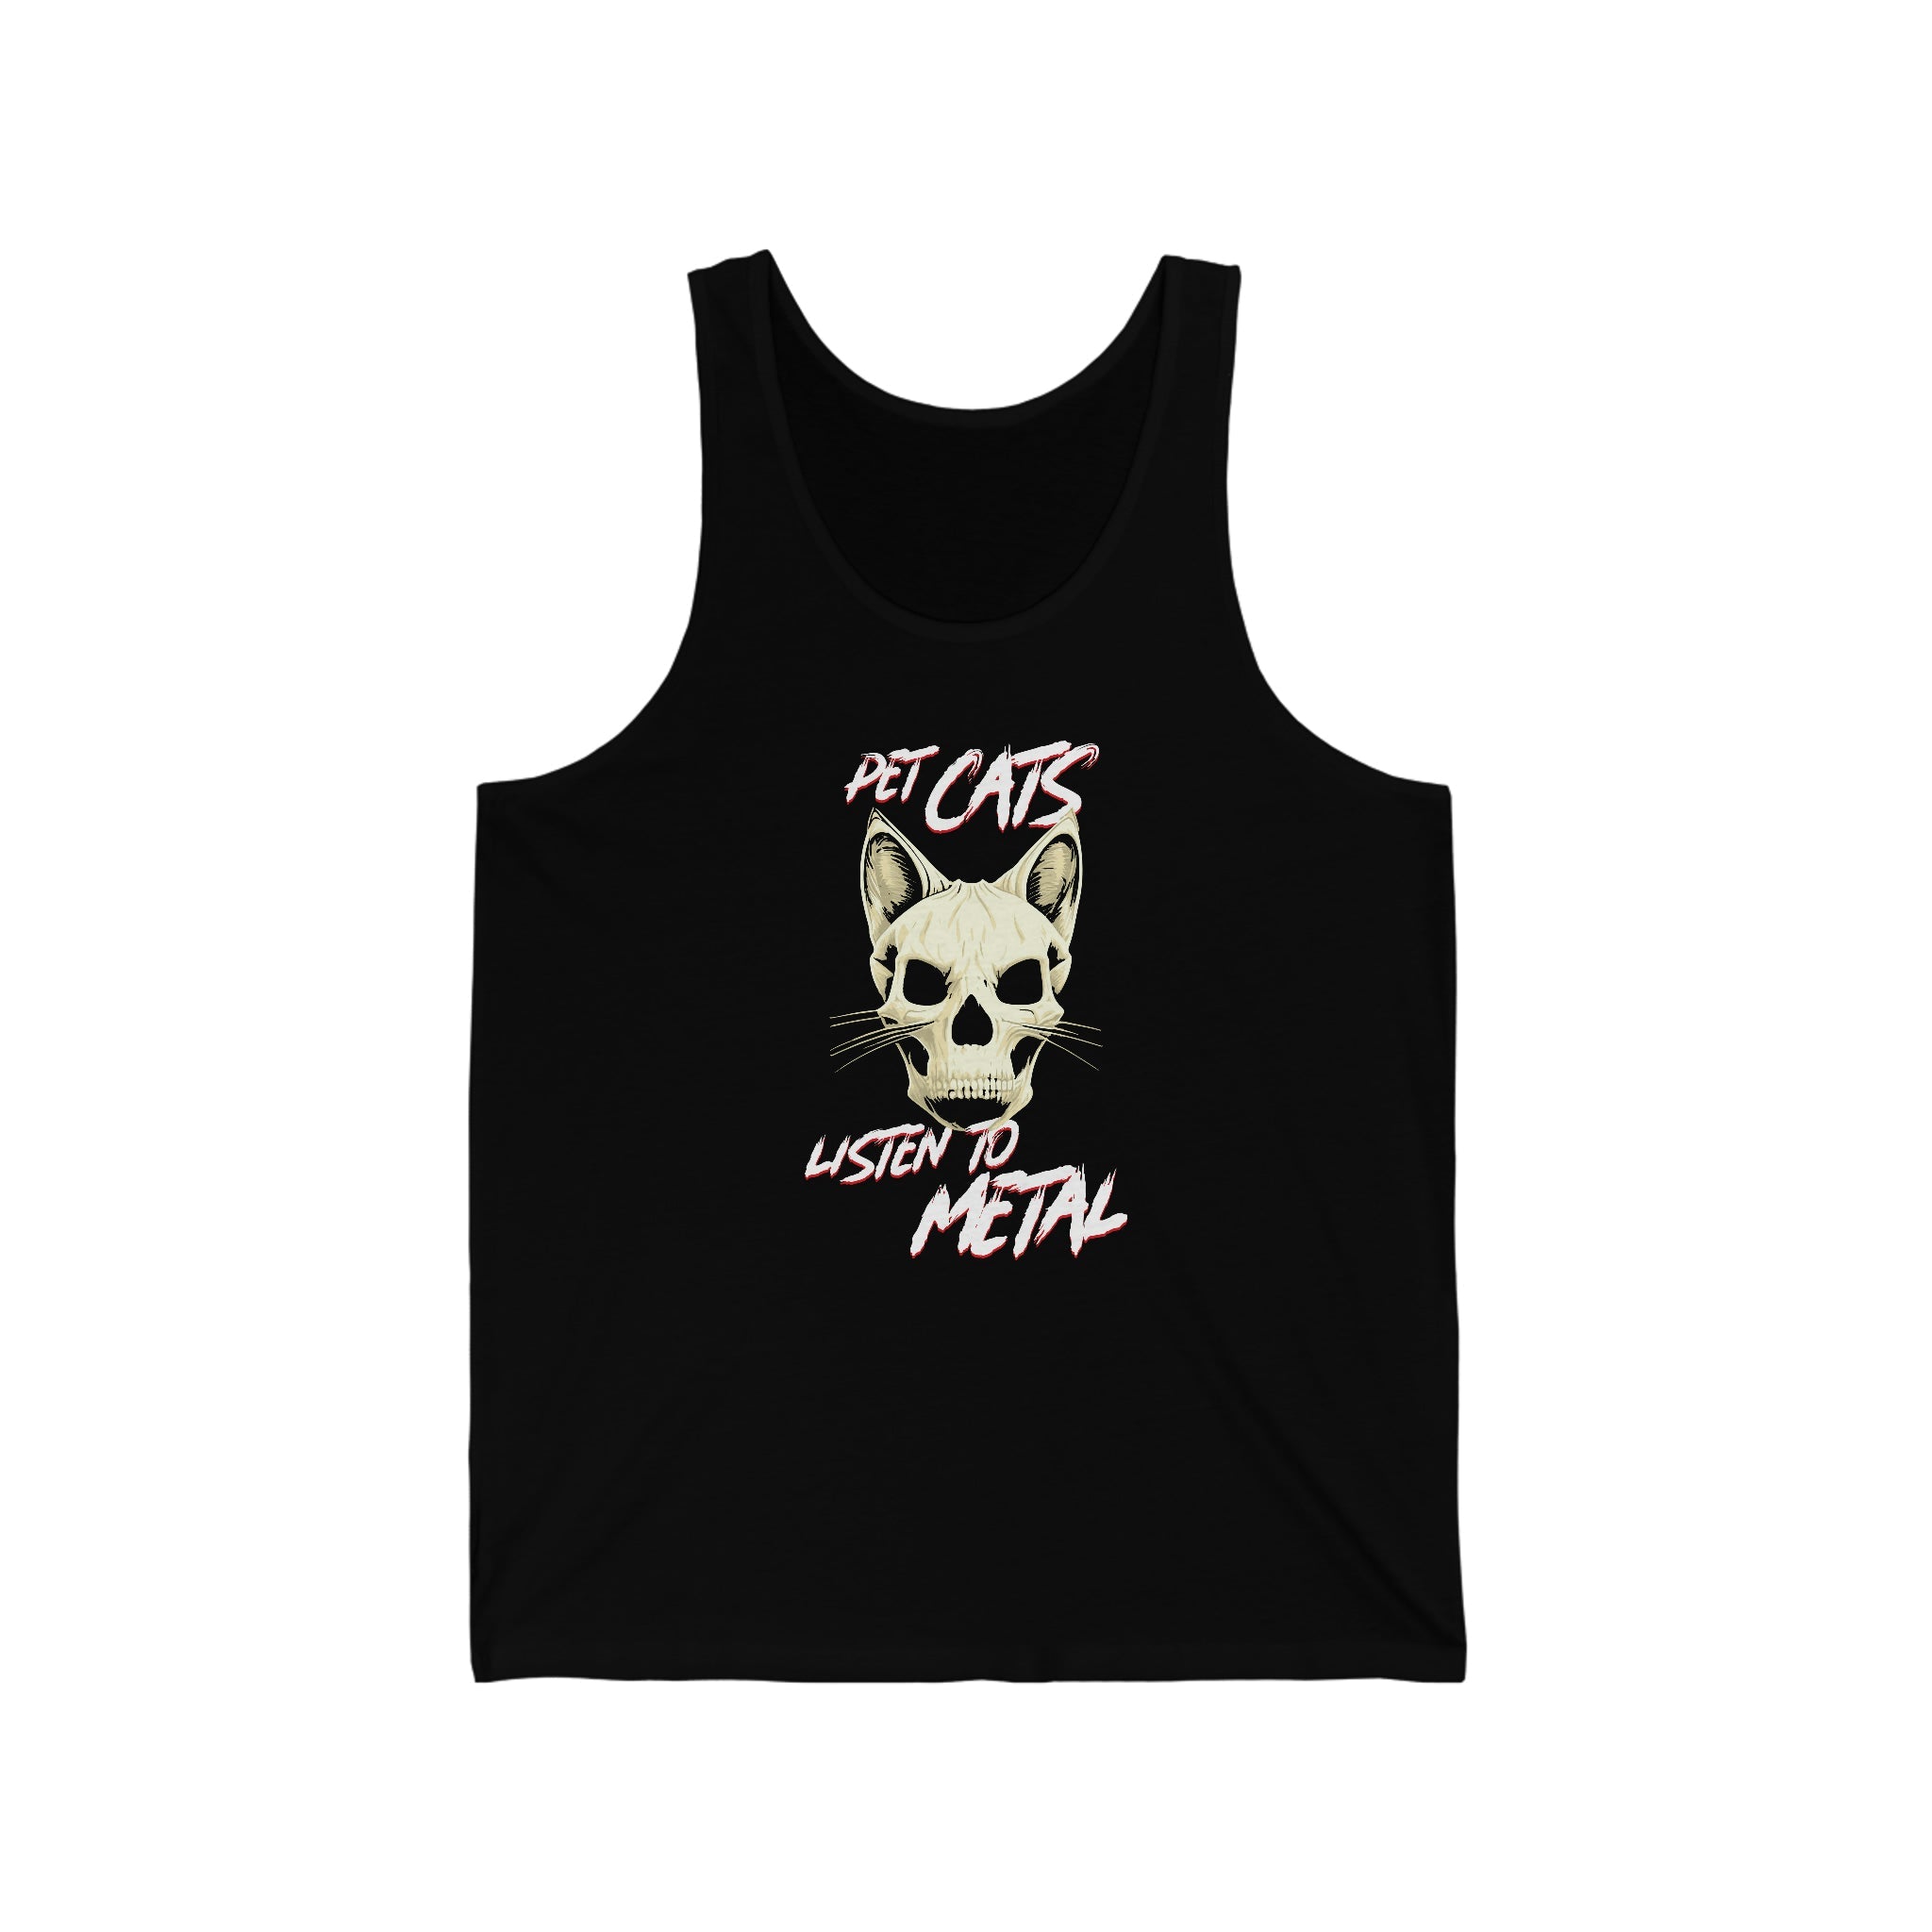 Pet Cats Listen to Metal : Unisex 100% Cotton Tank Top - Double Sided!!